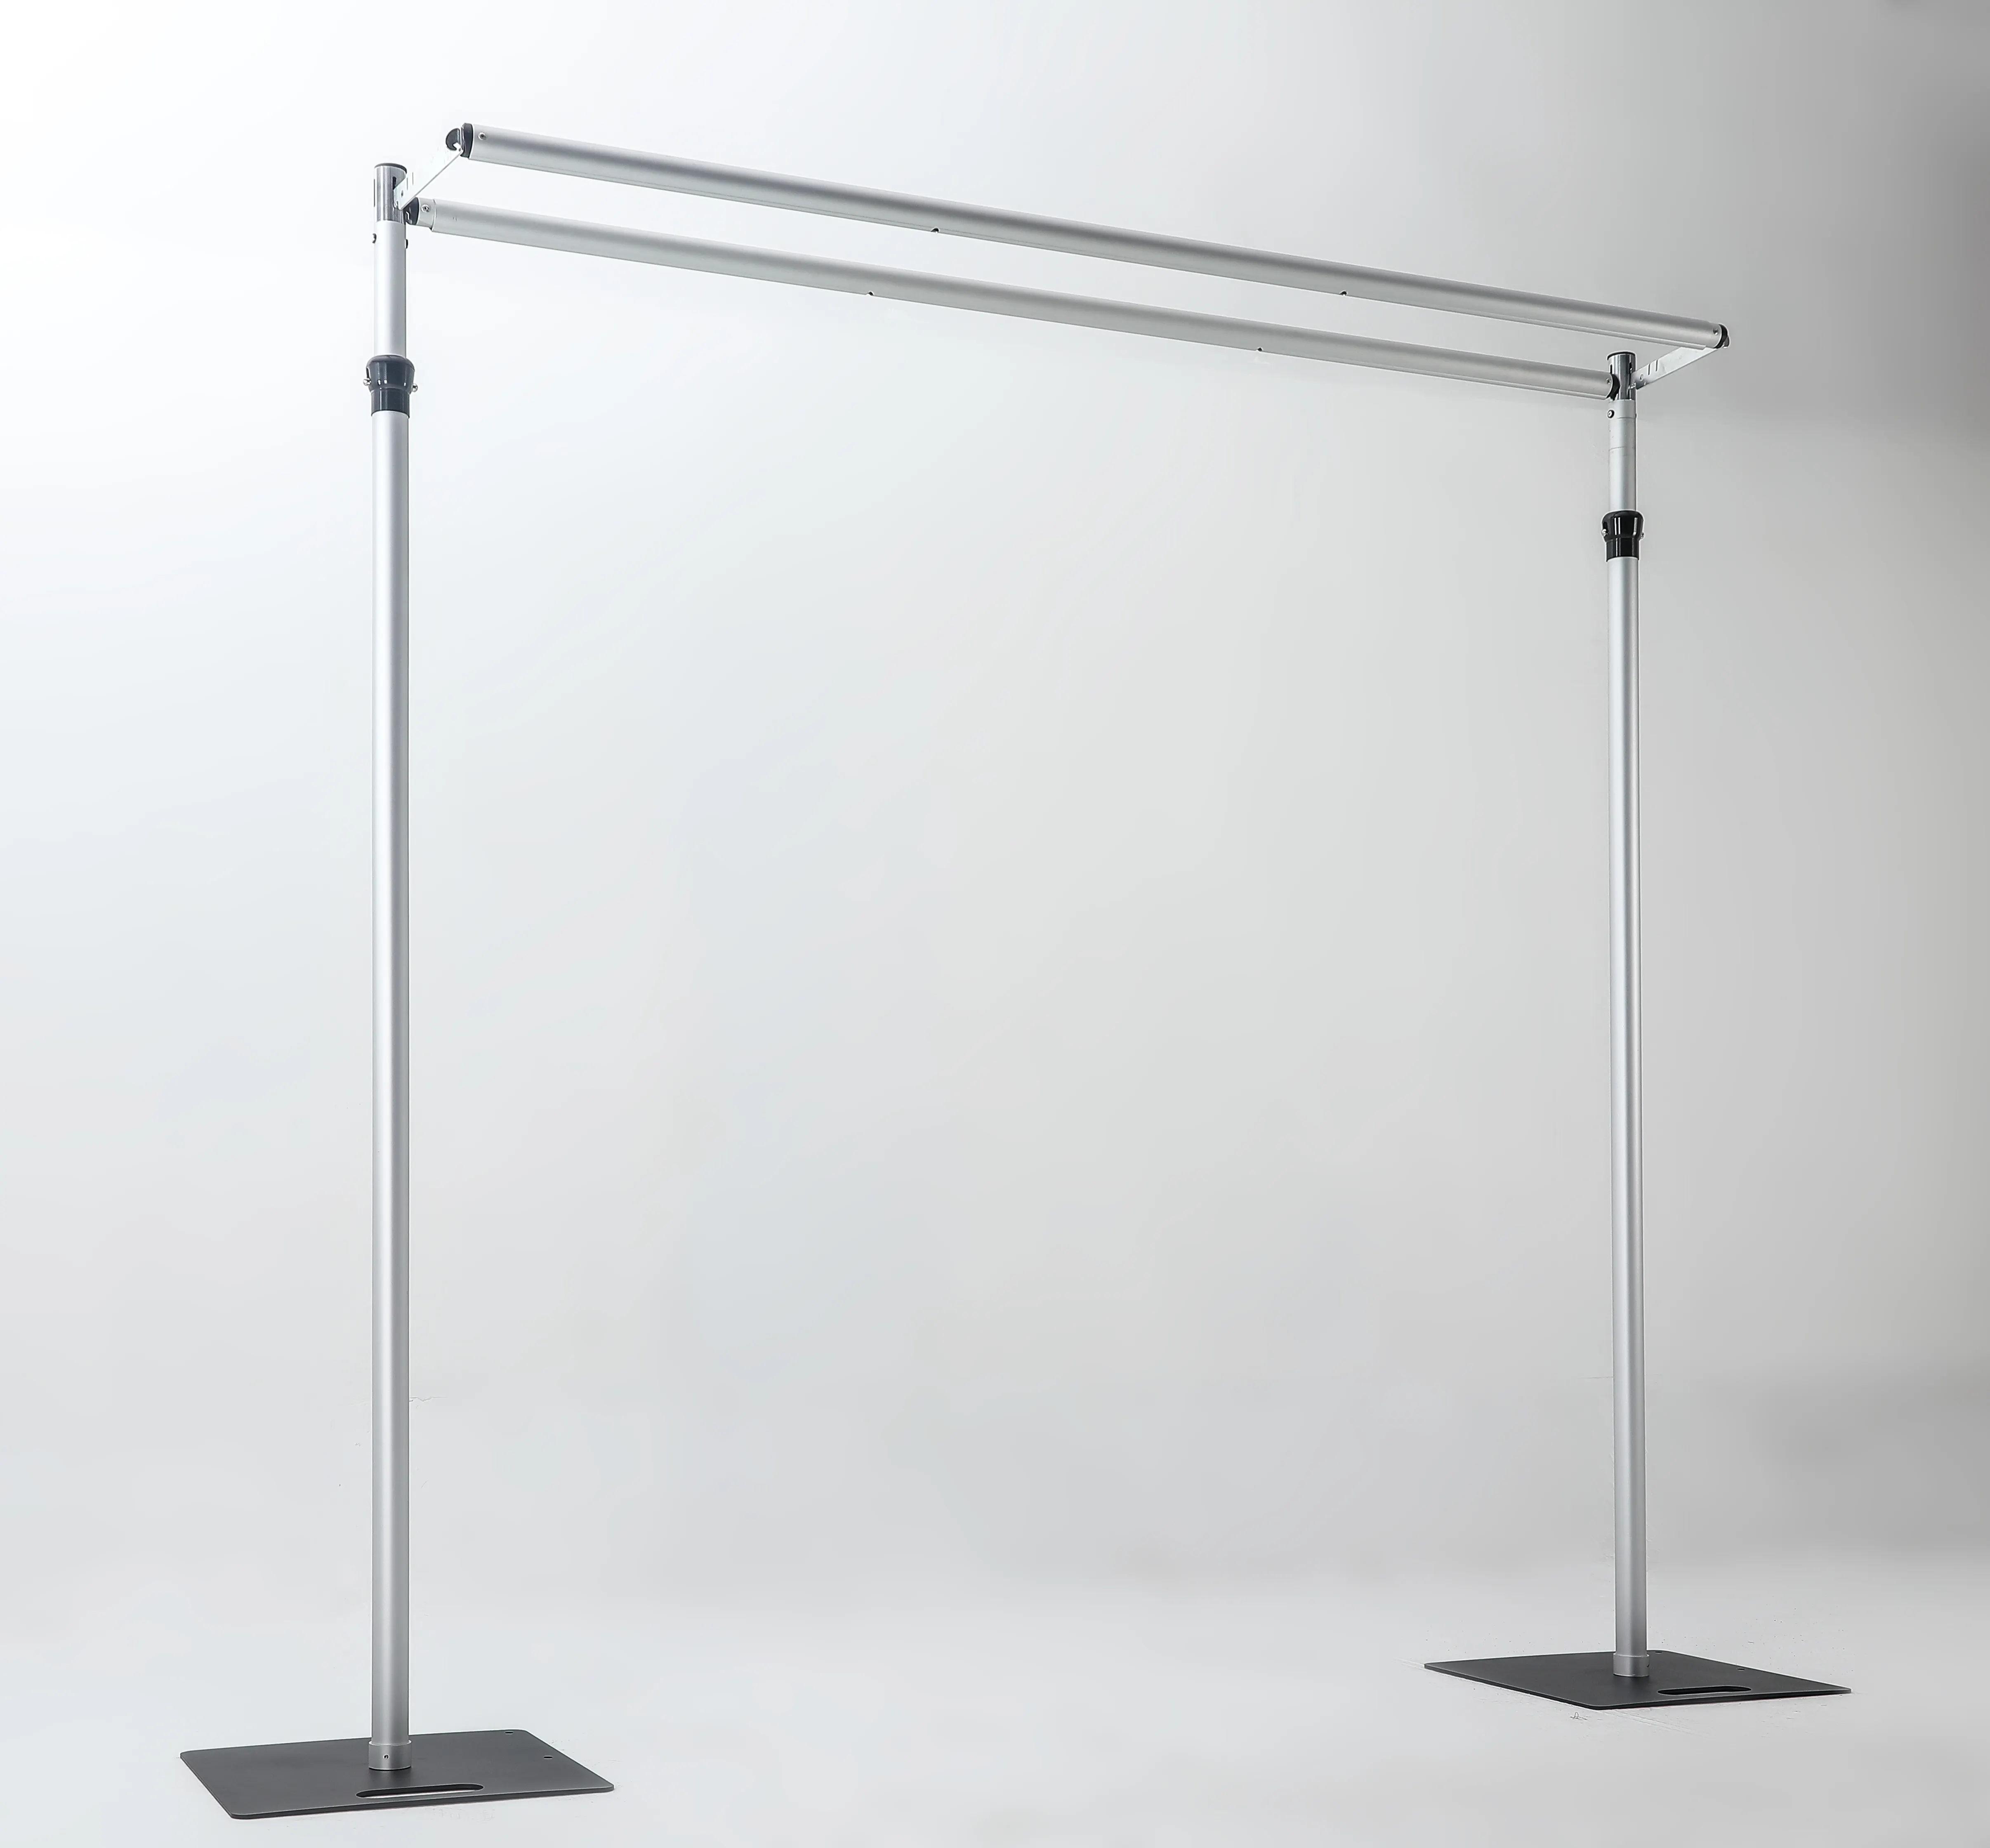 KL-PAD002 Wholesale heavy duty adjustable double crossbar pipe and drape backdrop stand pipe and drape adjustable uprights